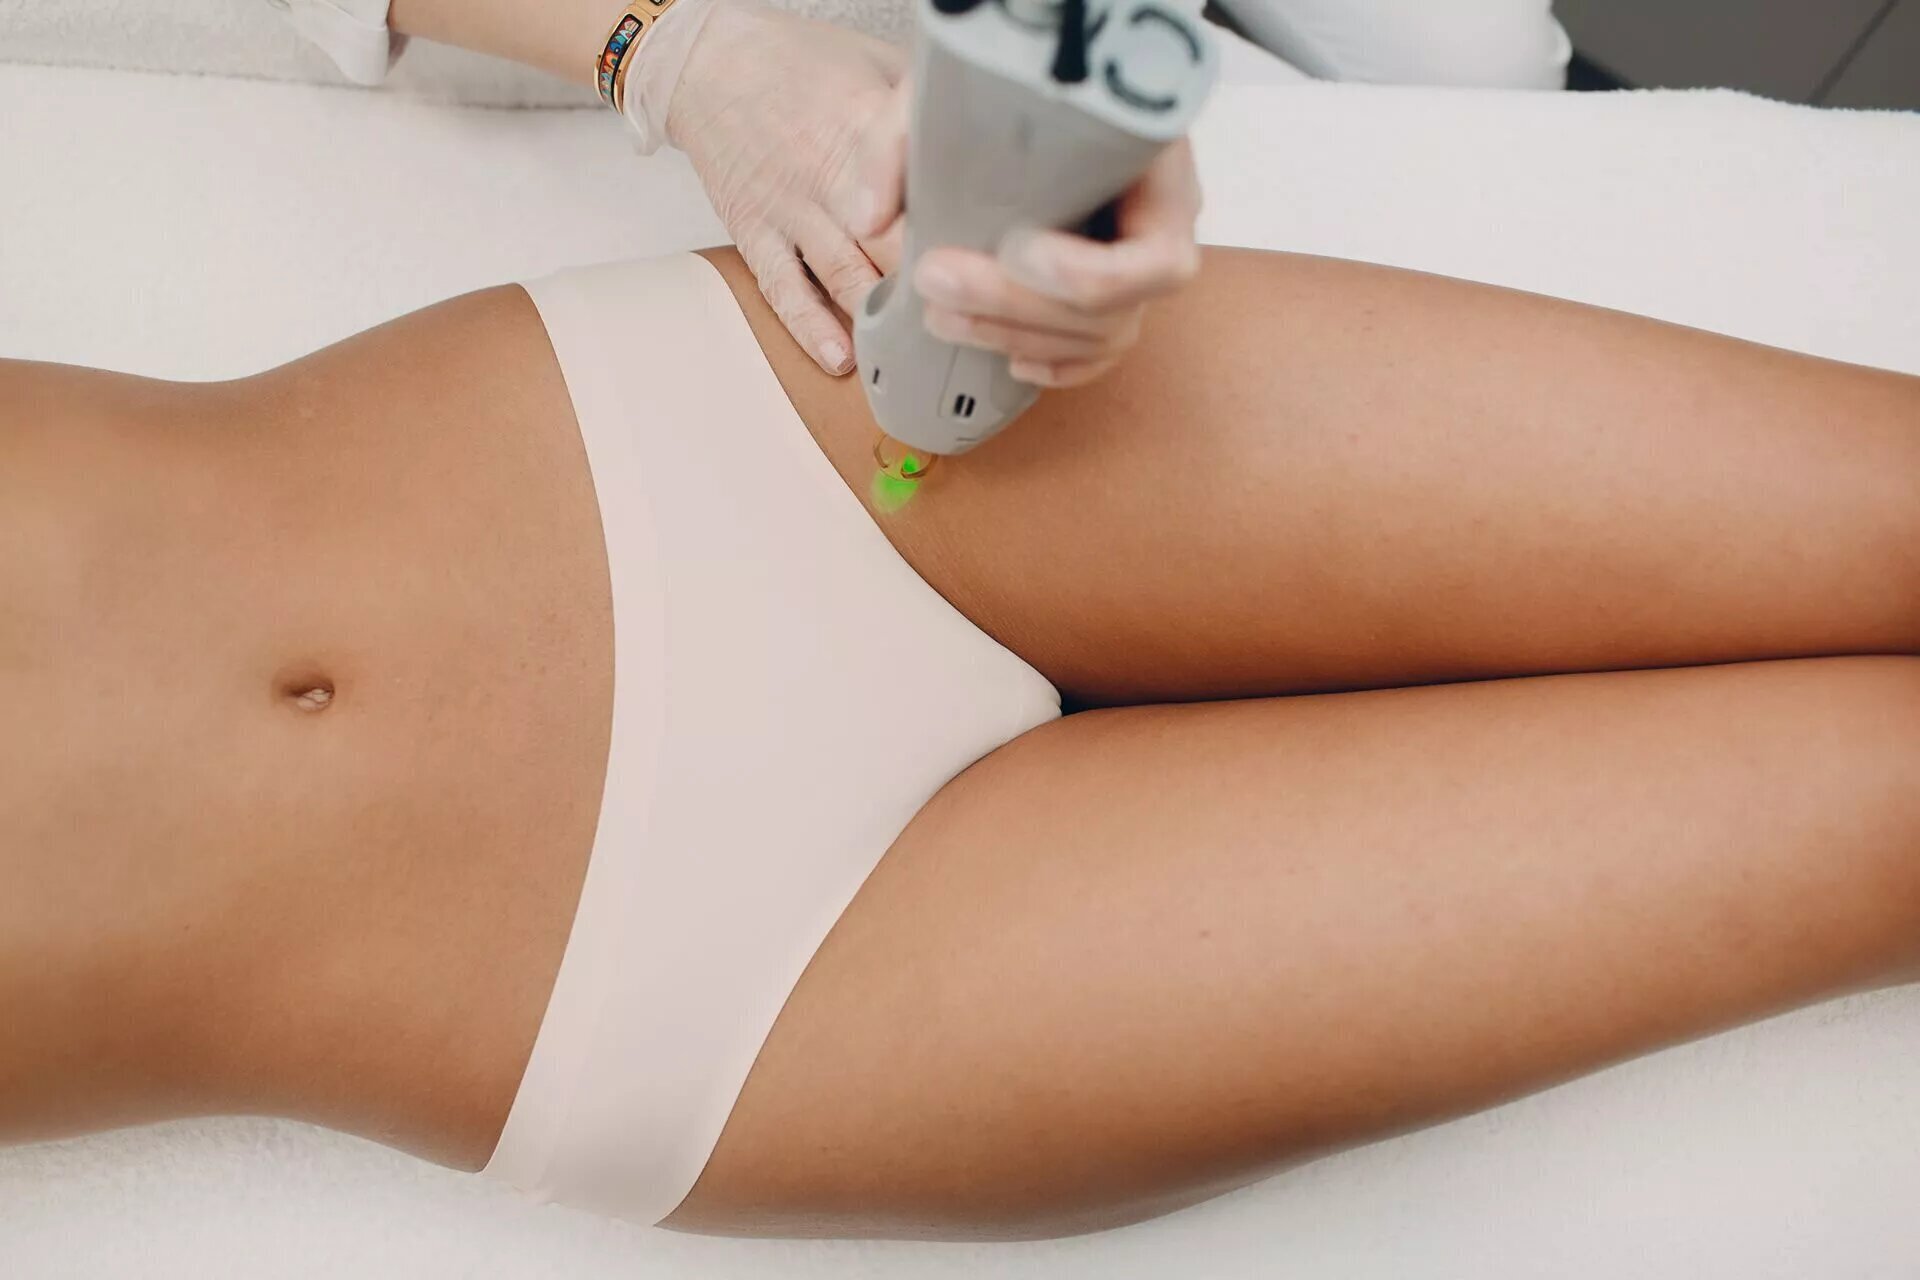 Laser Hair Removal Myths Vs Facts